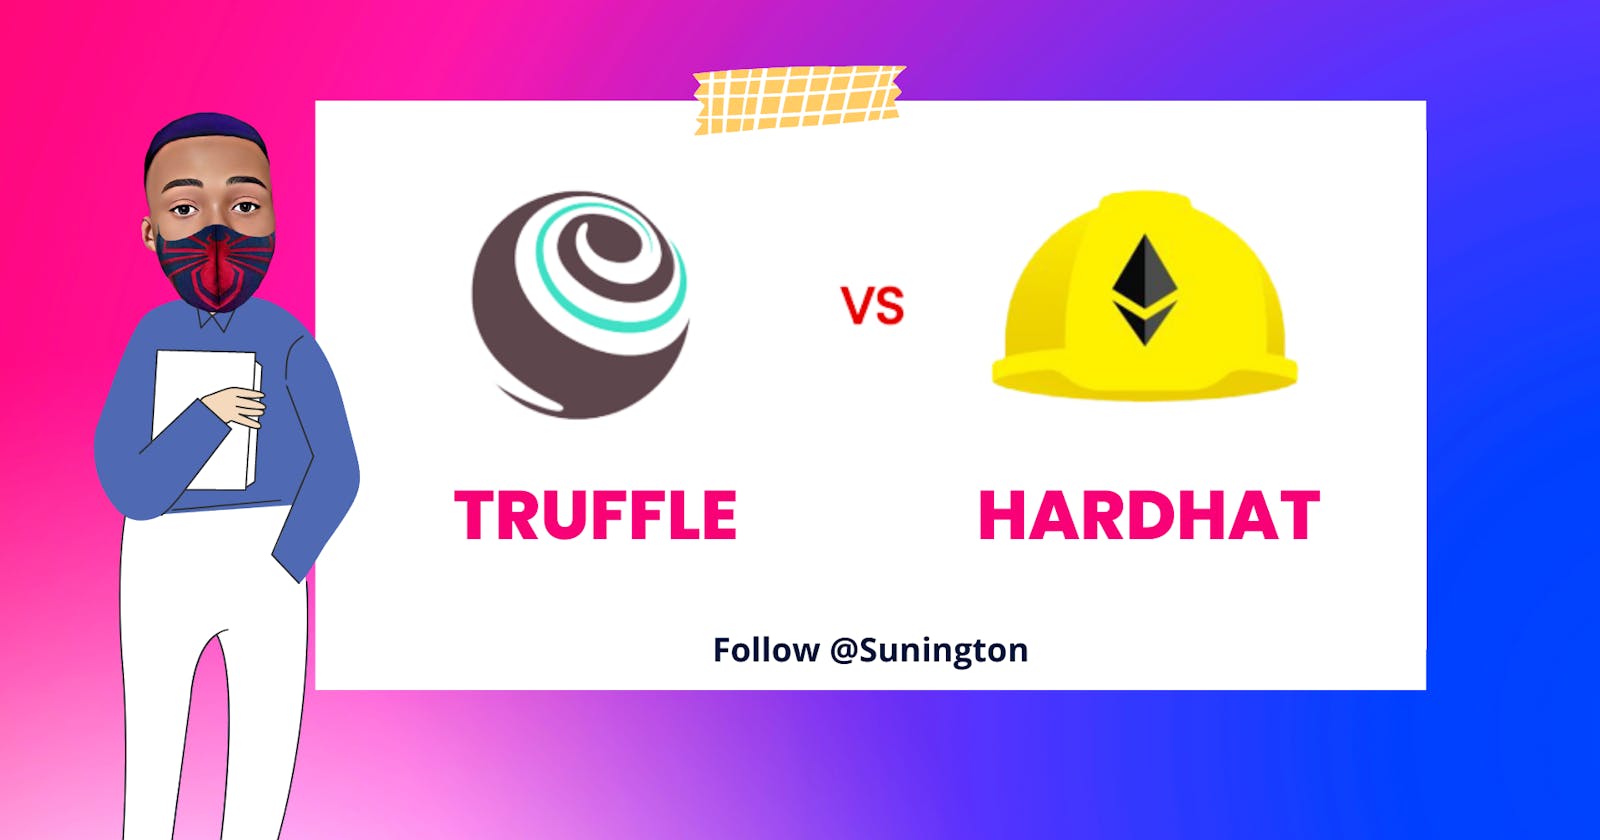 Wait! I’m stuck. Which is the Best TRUFFLE or HARDHAT?